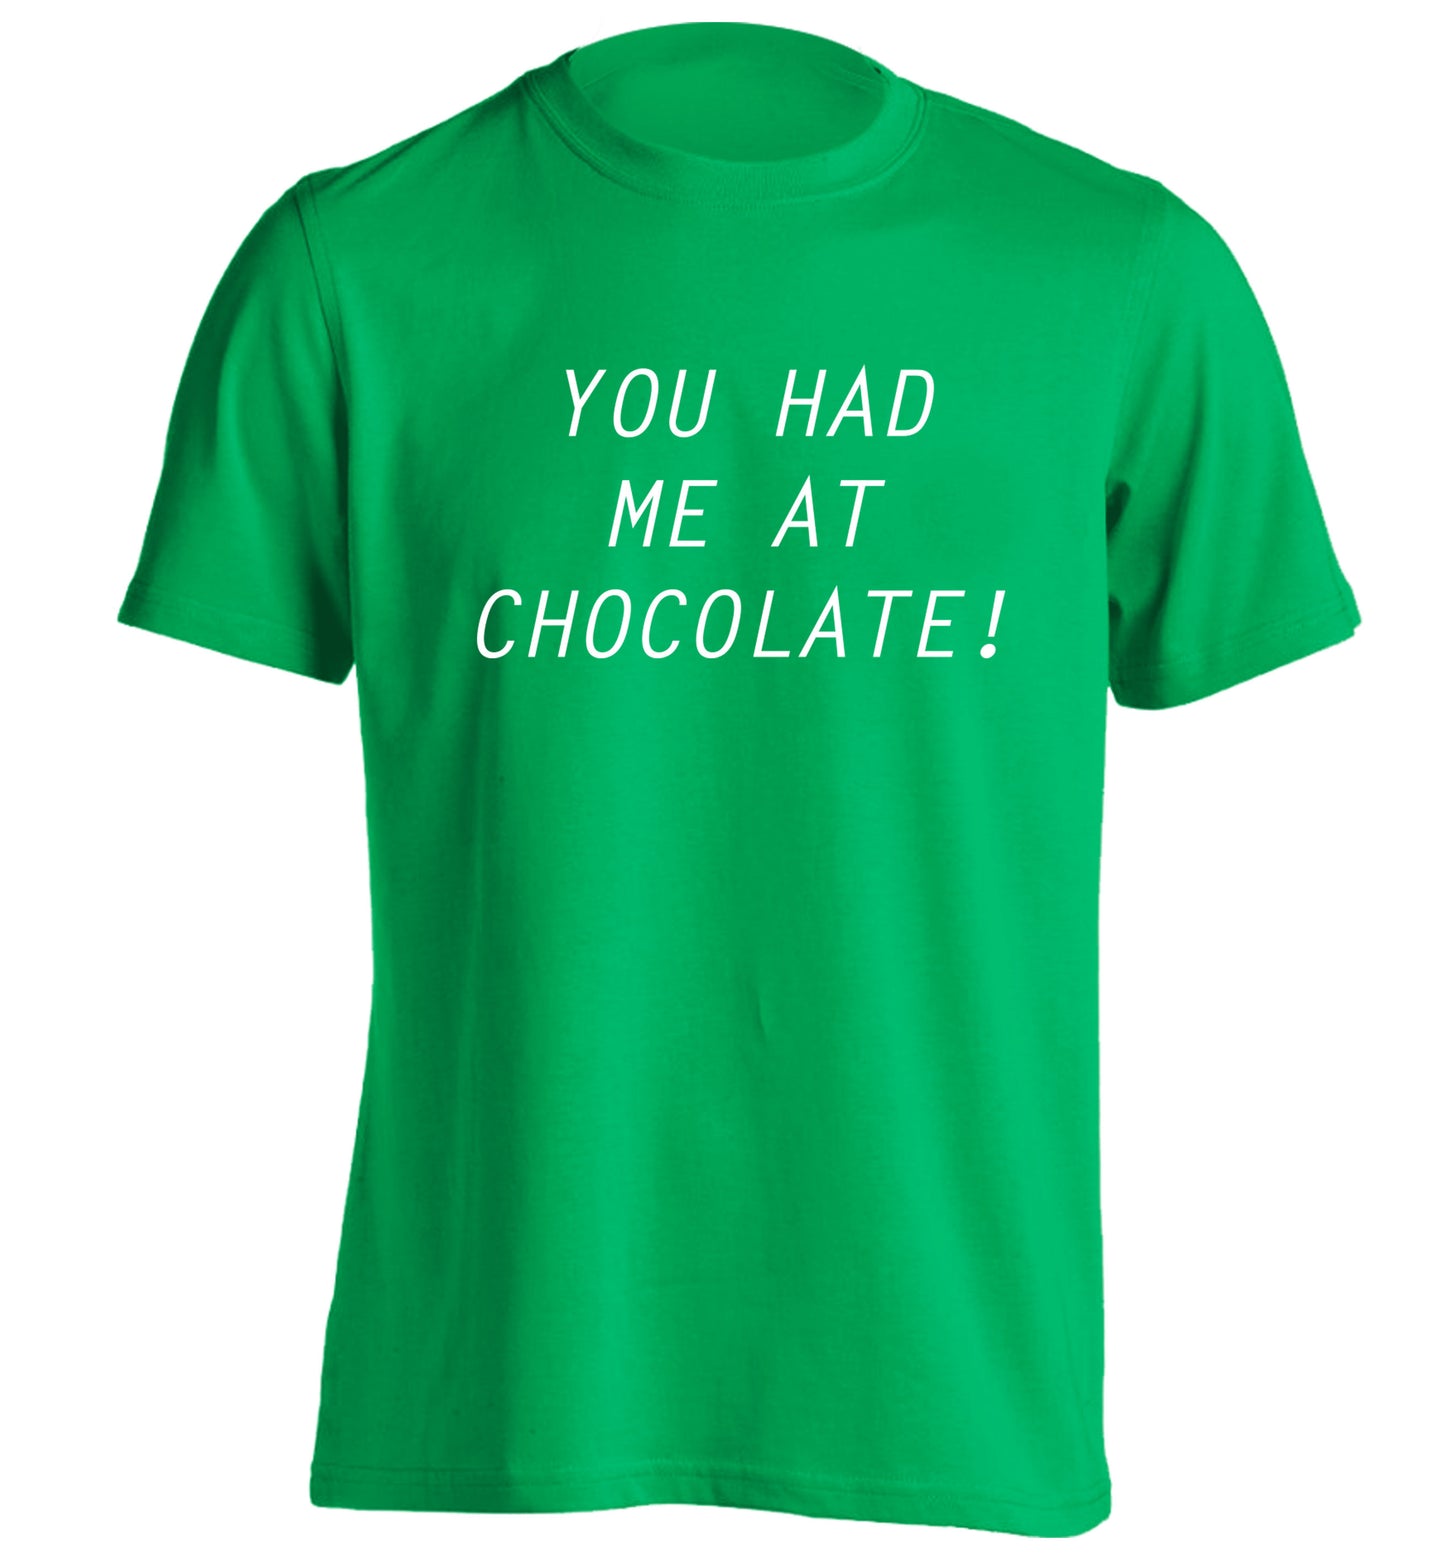 You had me at chocolate adults unisex green Tshirt 2XL